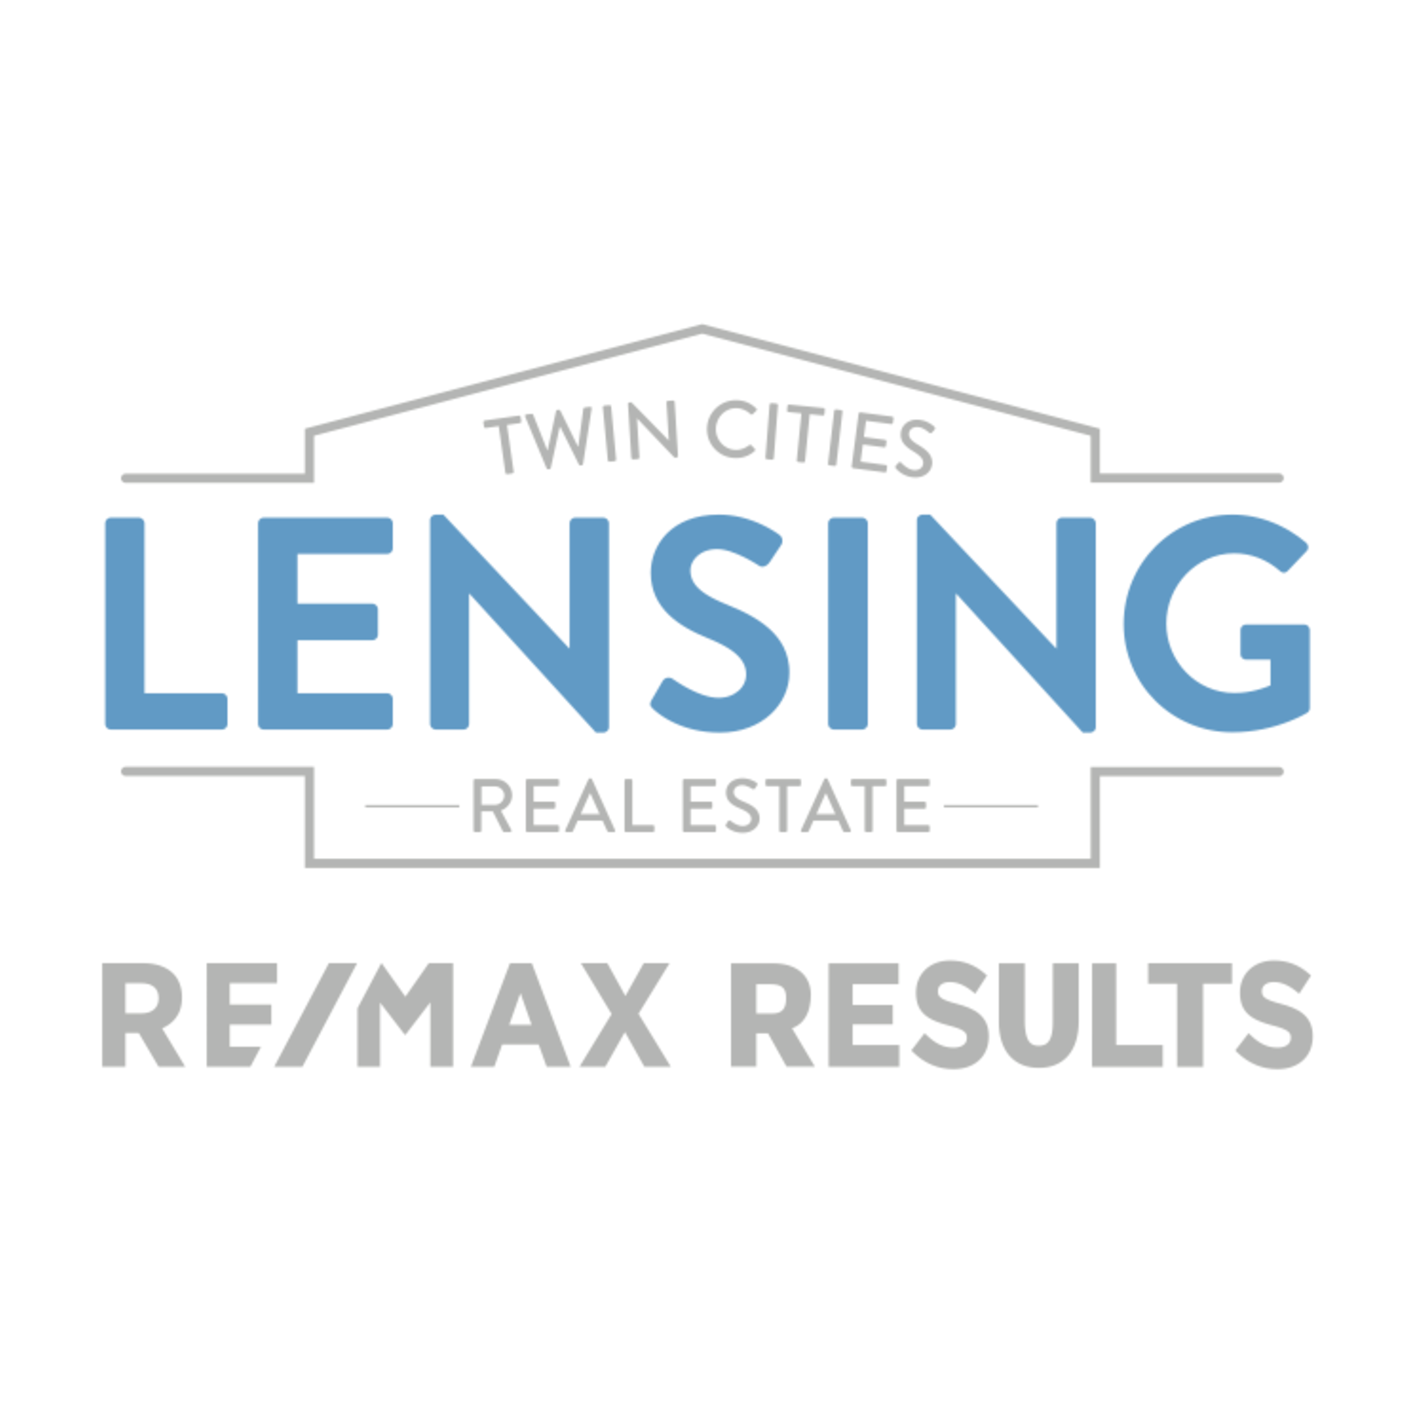 Clark Lensing | RE/MAX Results - Minneapolis, MN 55419 - (612)408-8554 | ShowMeLocal.com